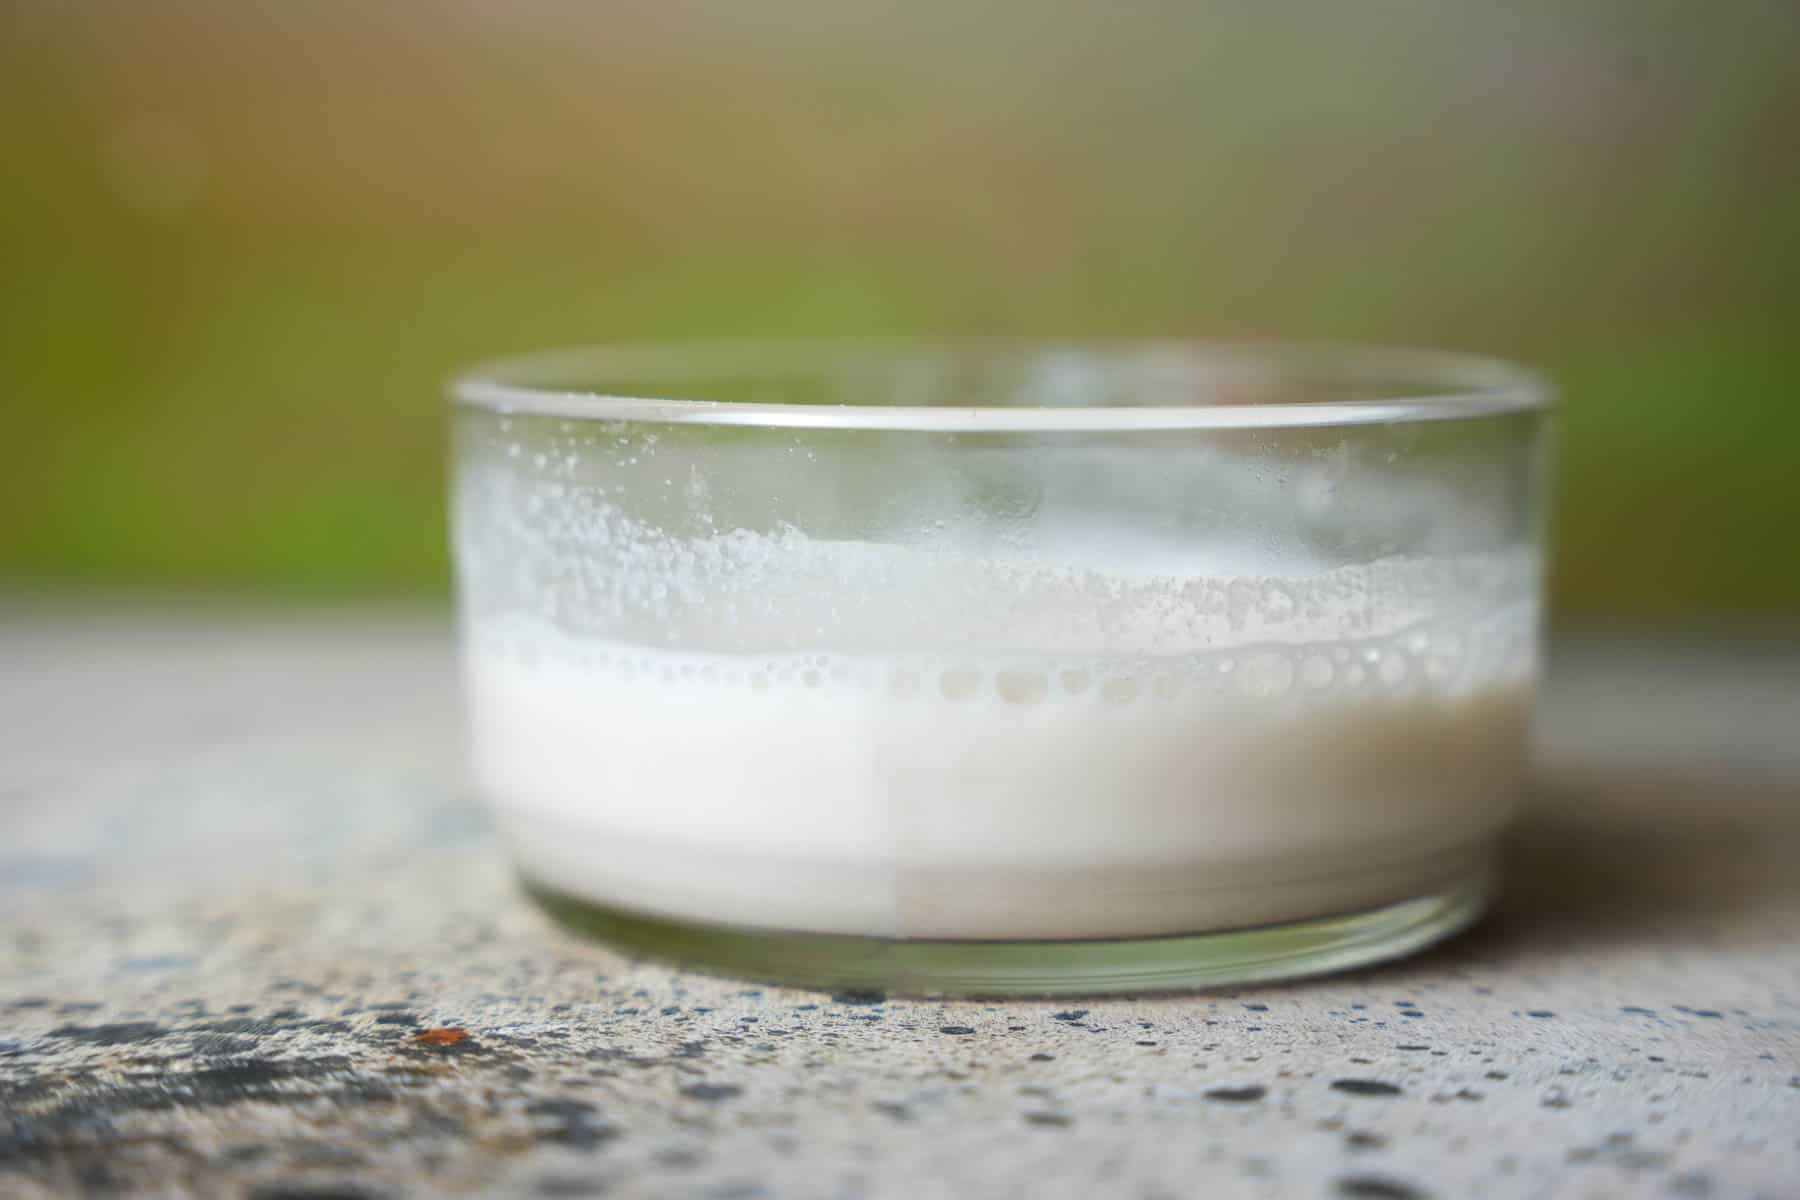 Cornstarch slurry is mixed in a glass bowl.